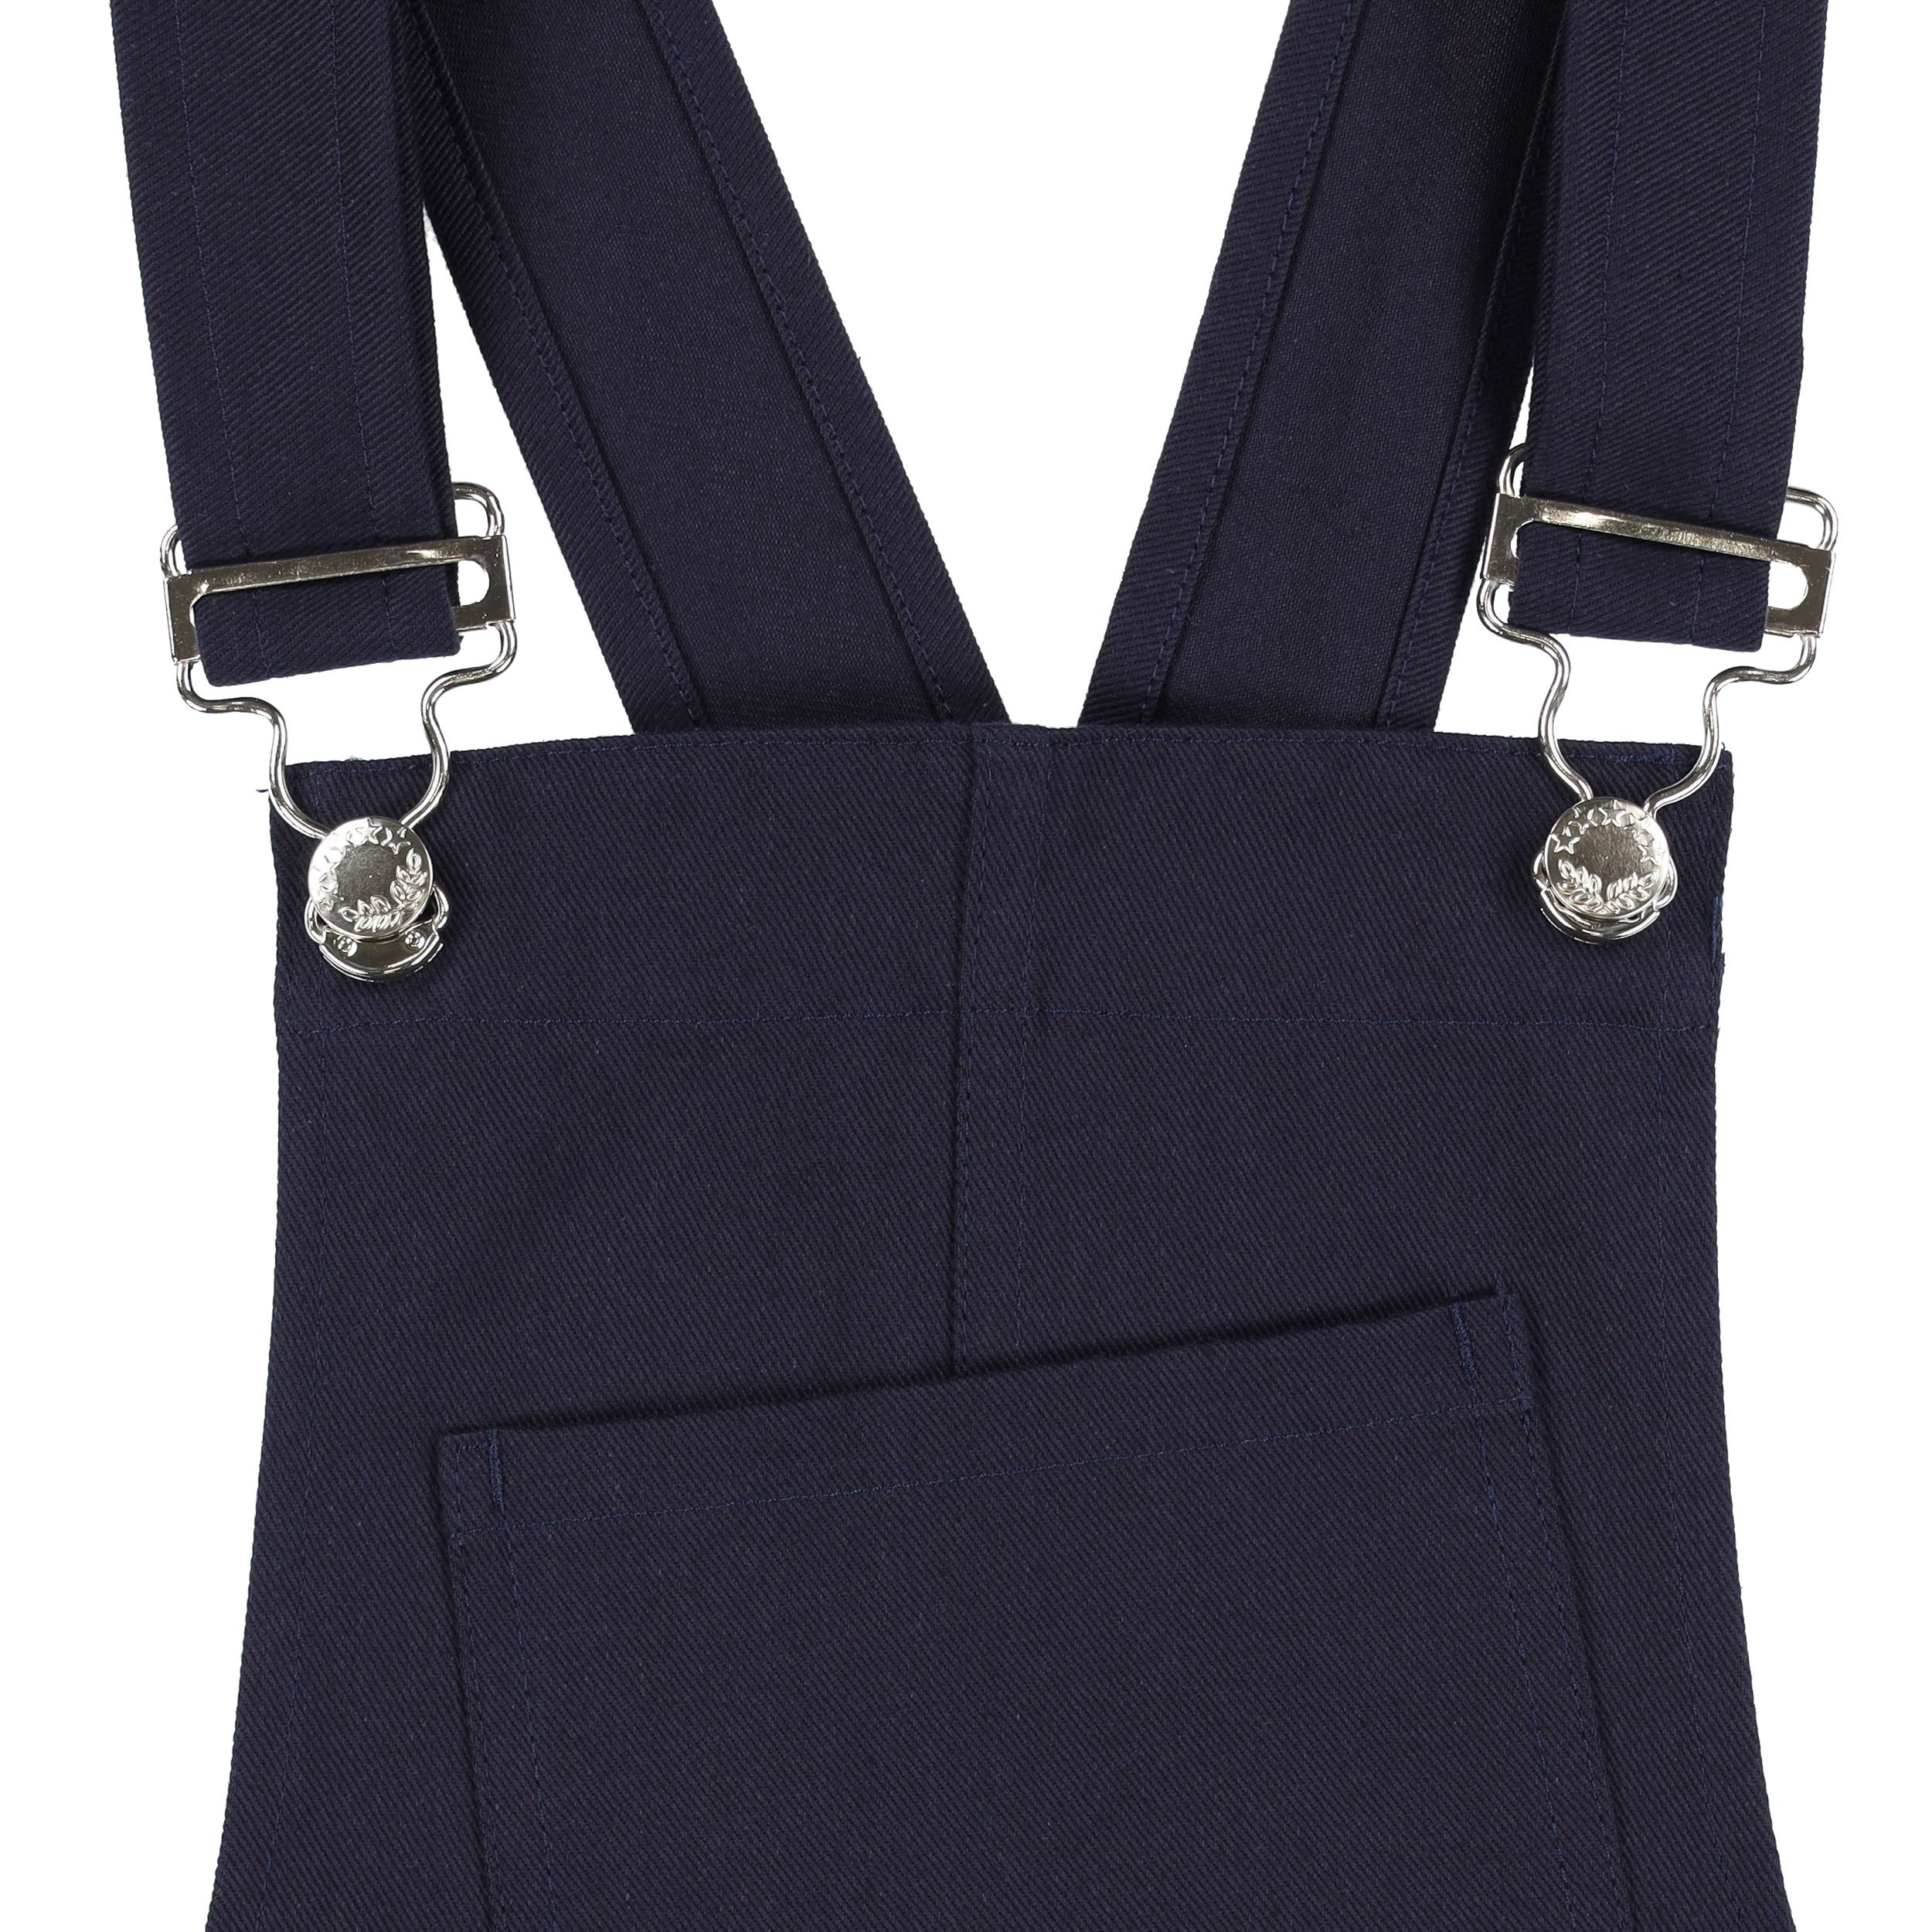 Close up of the shoulder straps and front pocket of the navy Carrier Company Men's Dungarees